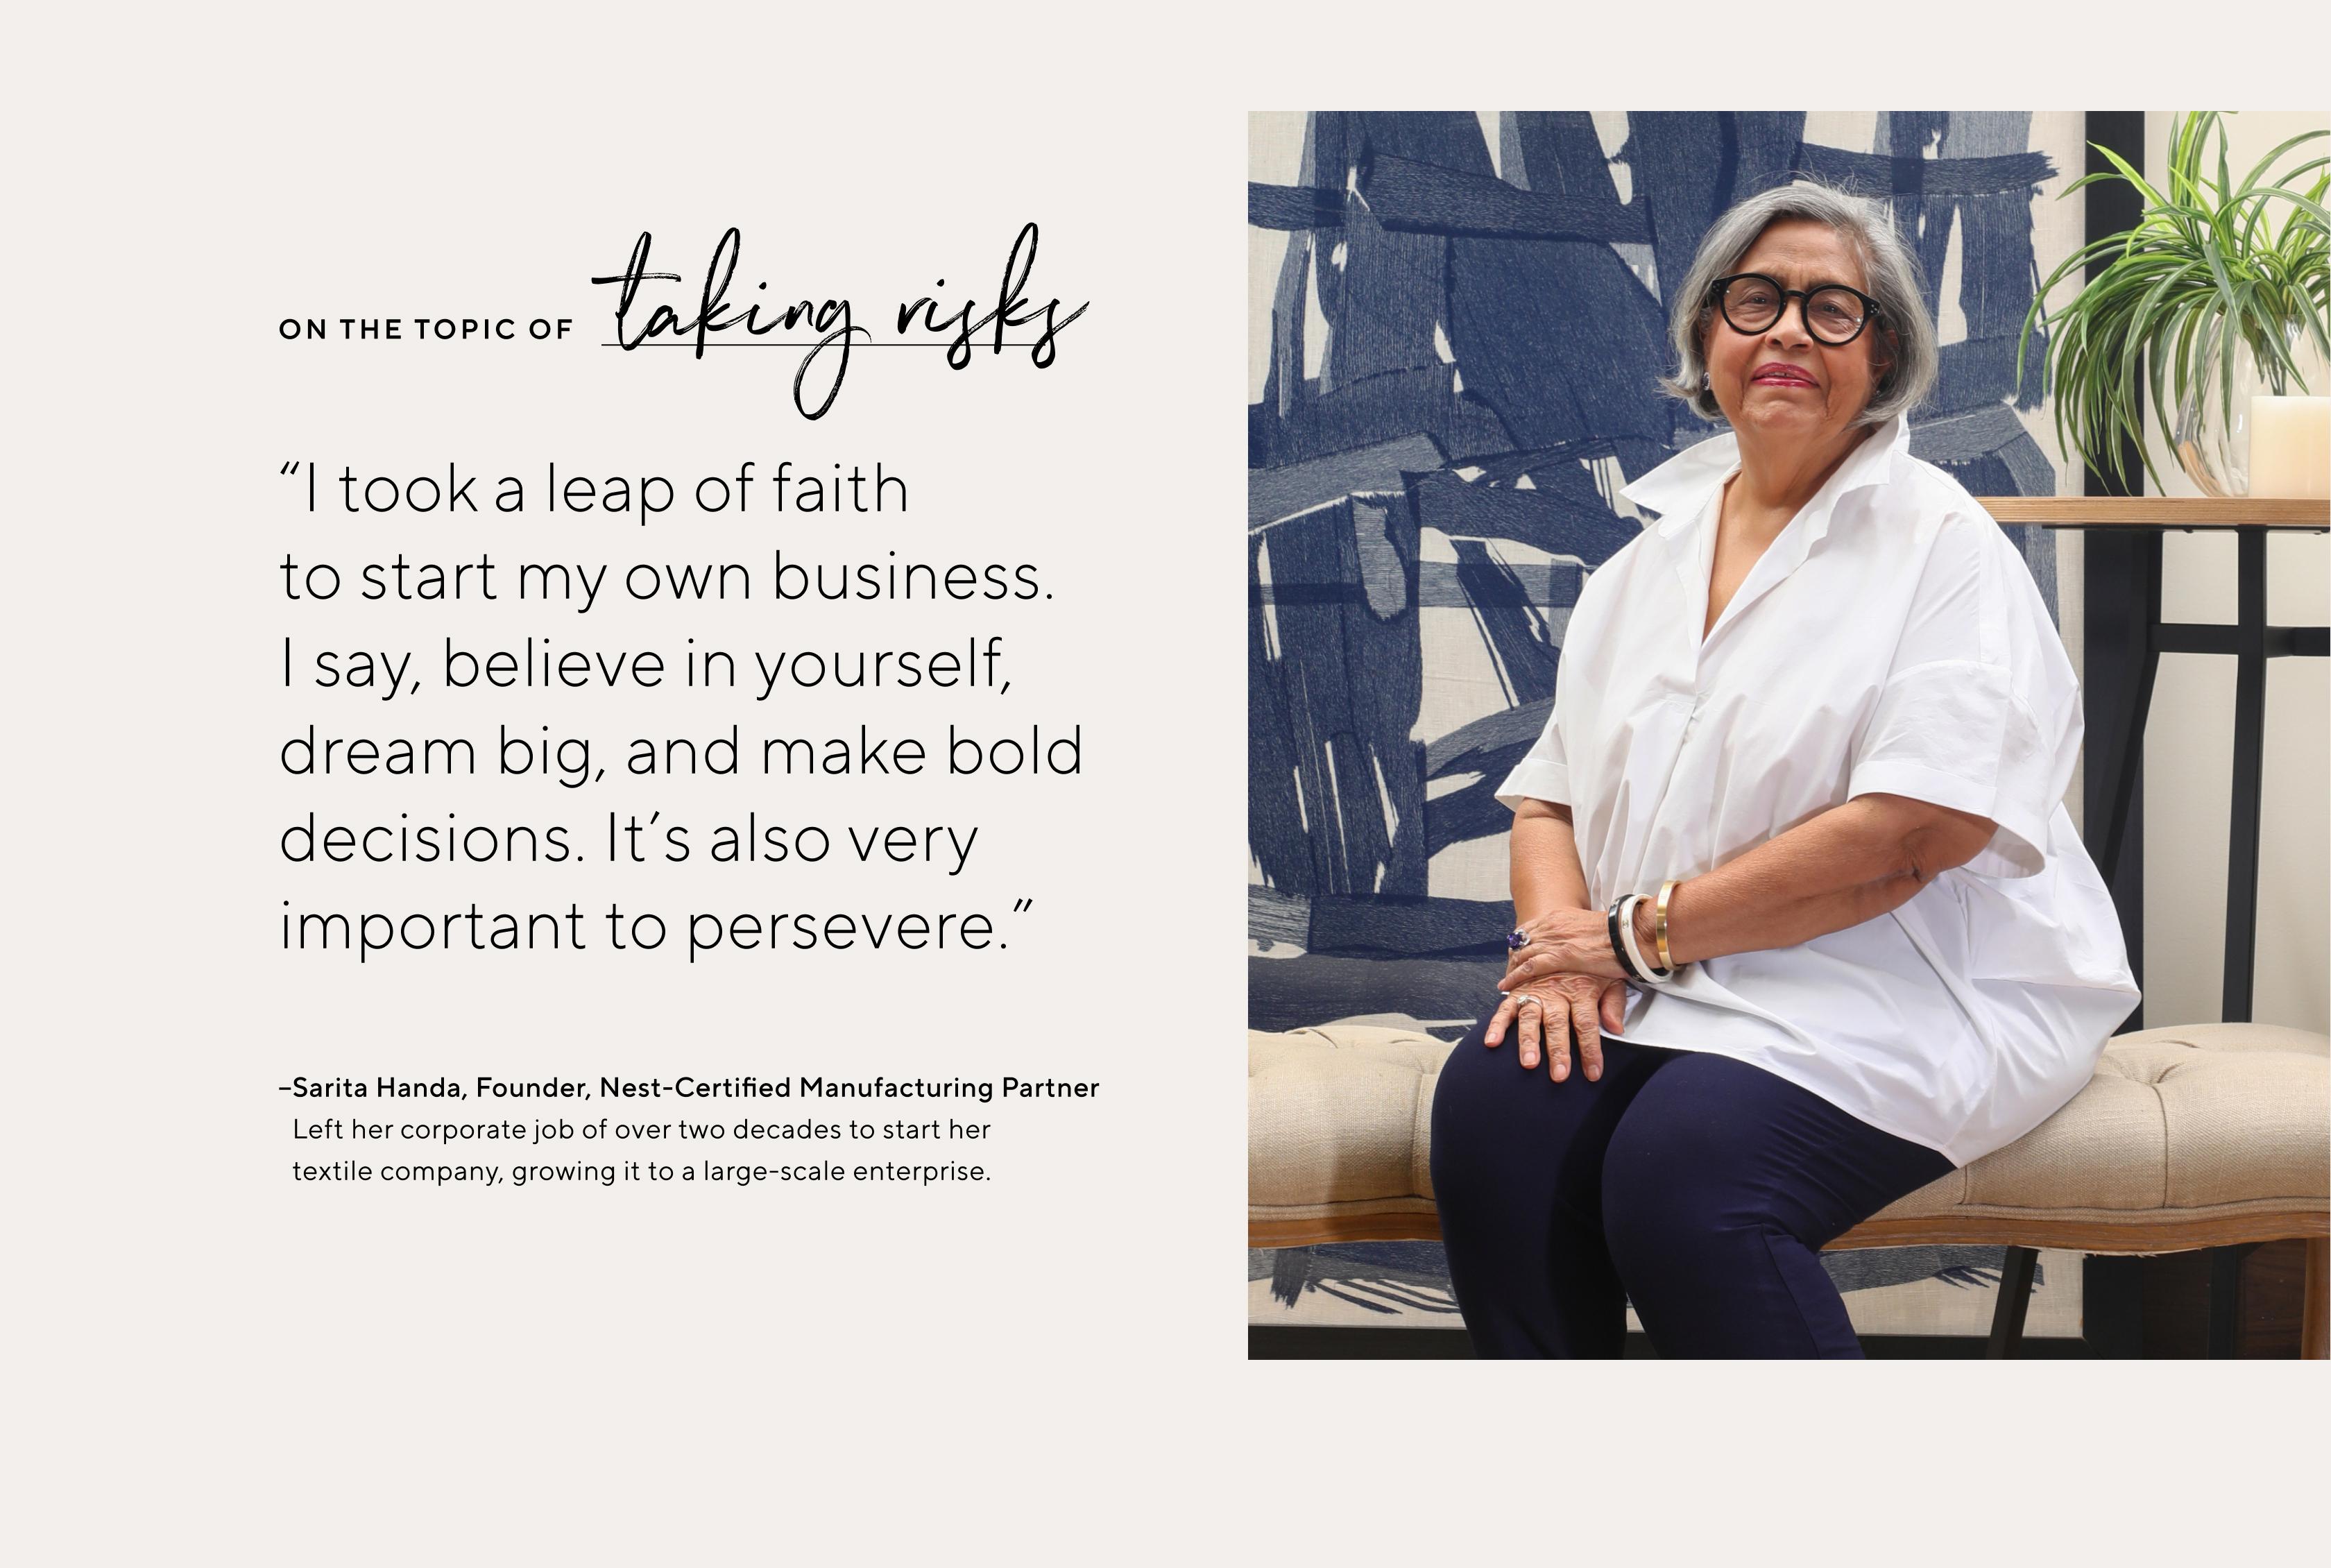 "I took a leap of faith to start my own business. I say, believe in yourself, dream big, and make bold decisions. It's also very important to persevere."